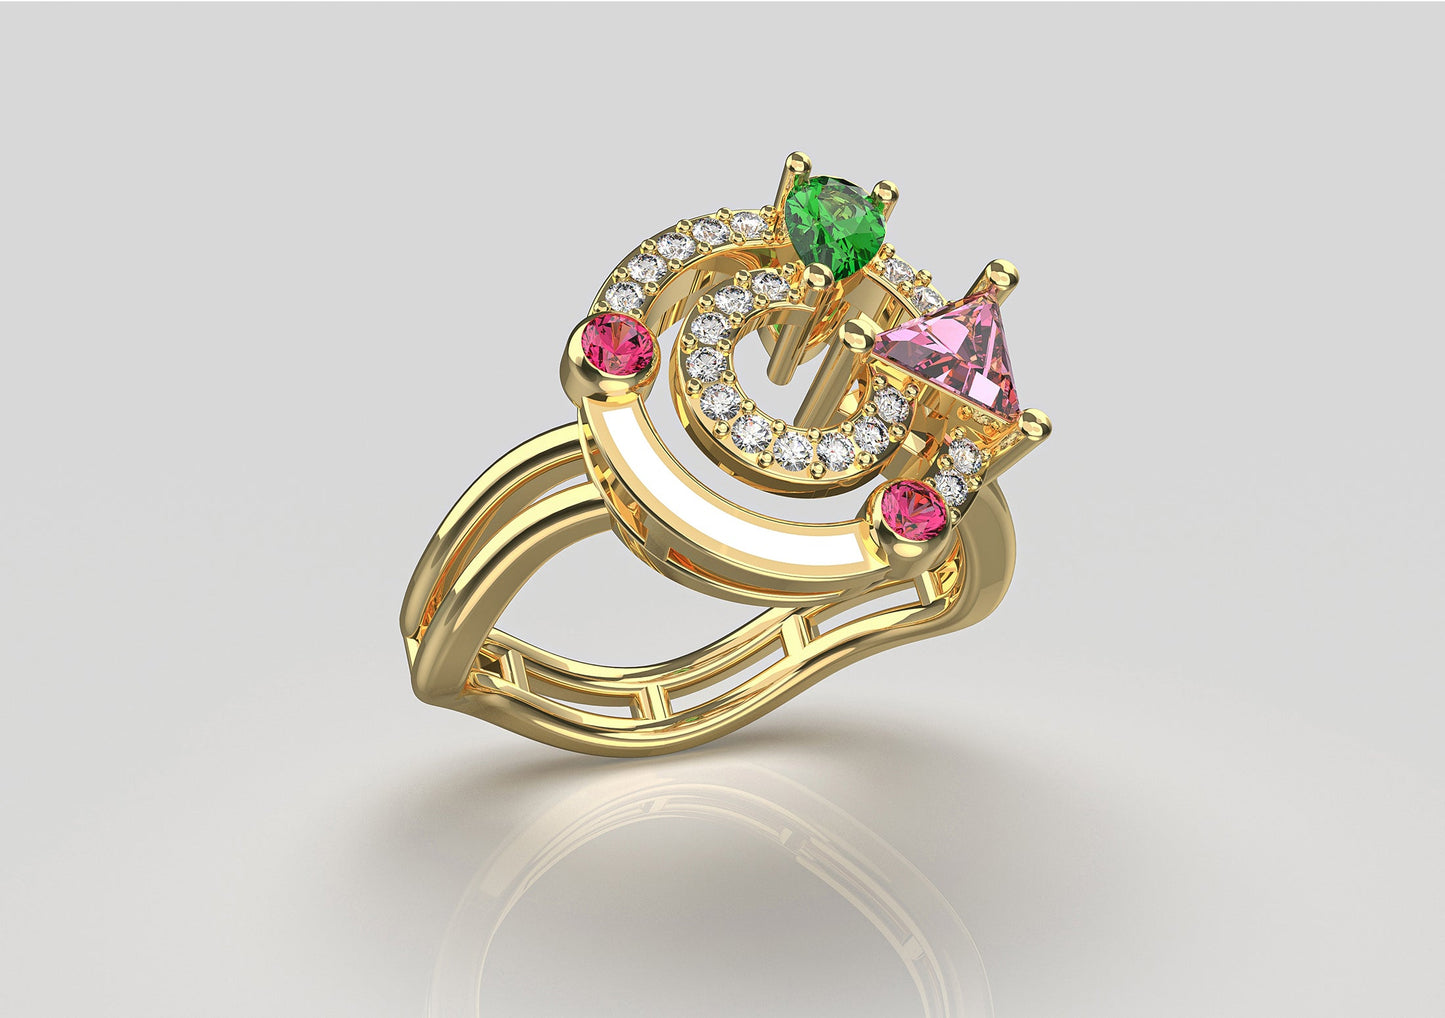 Round Diamond Ring with Trillion, Pear and Enamel